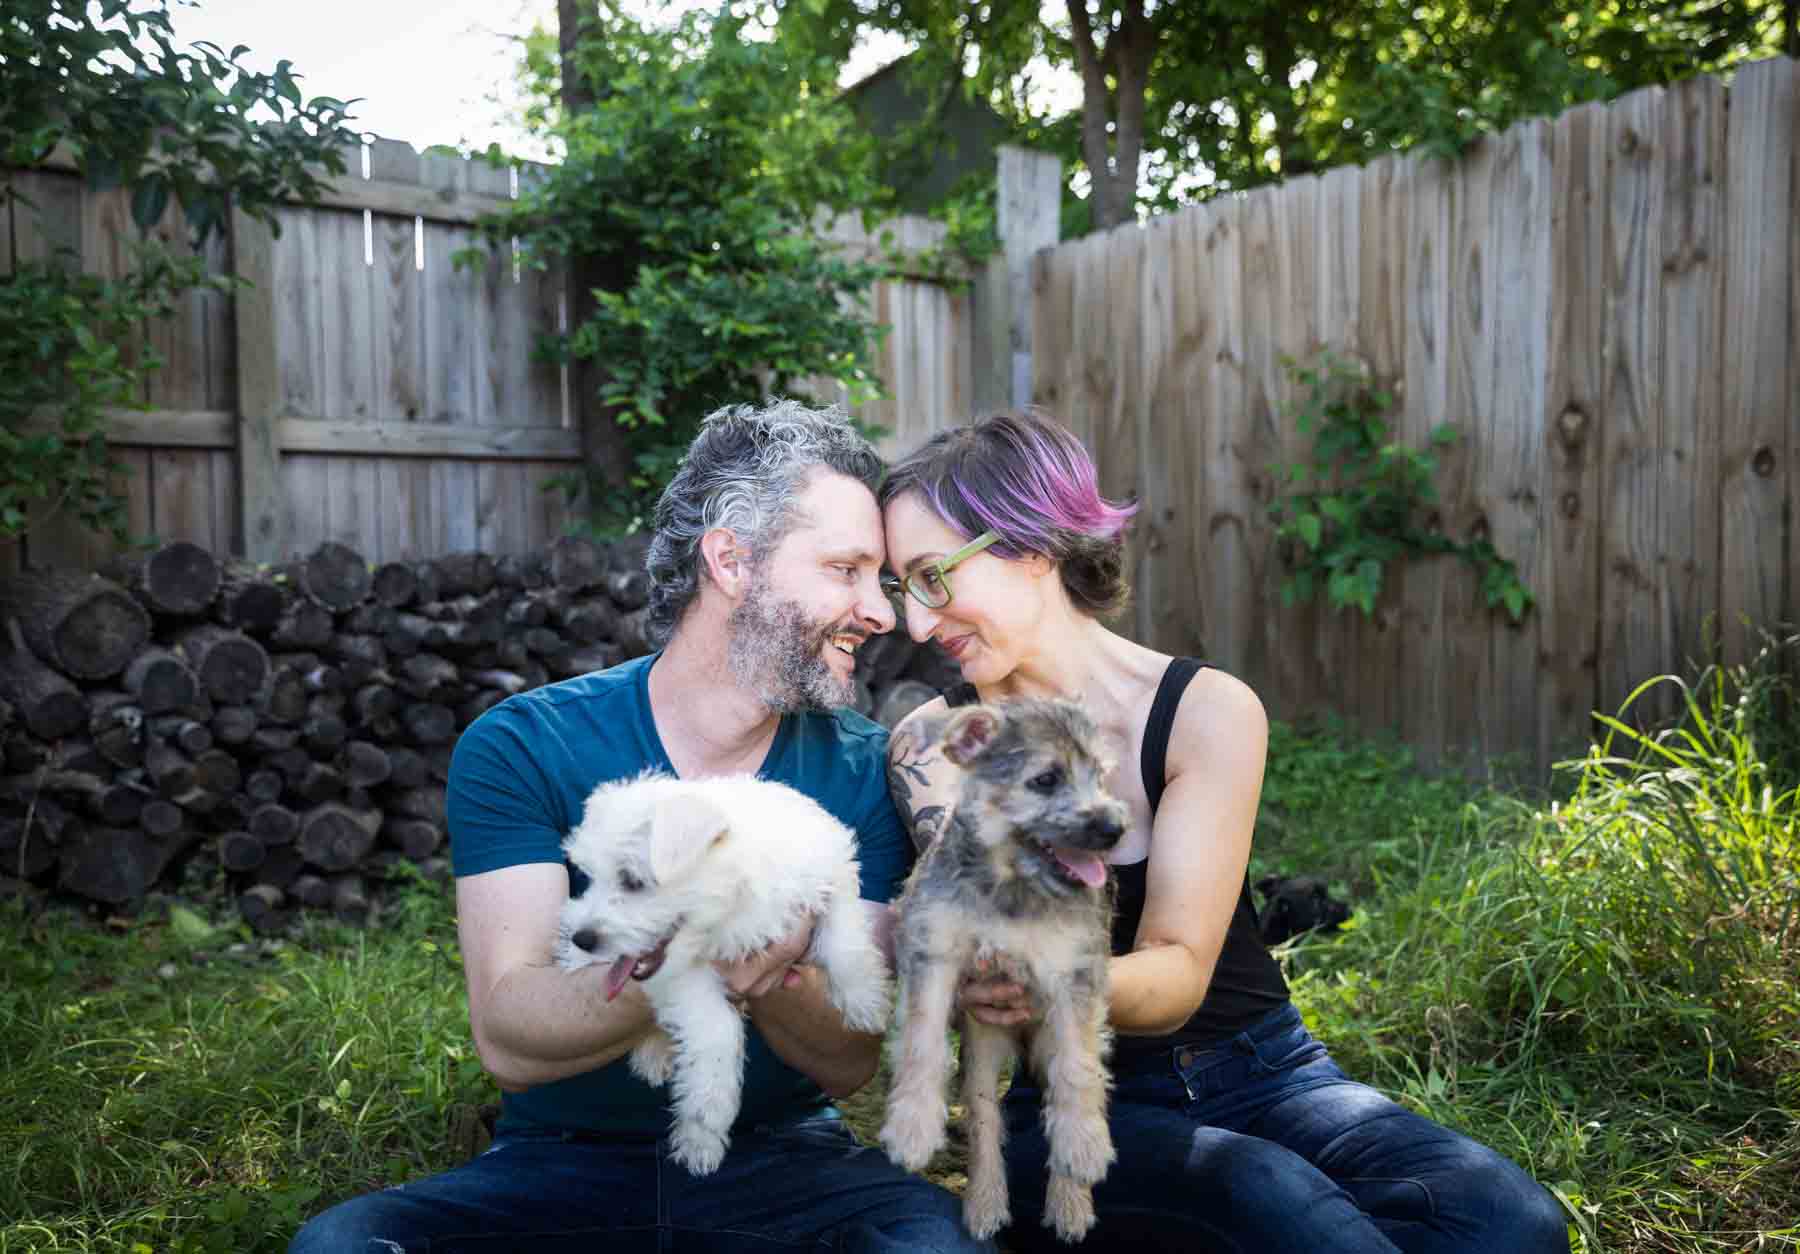 Couple pressing foreheads together while sitting on ground holding puppies for an article on pet photo tips